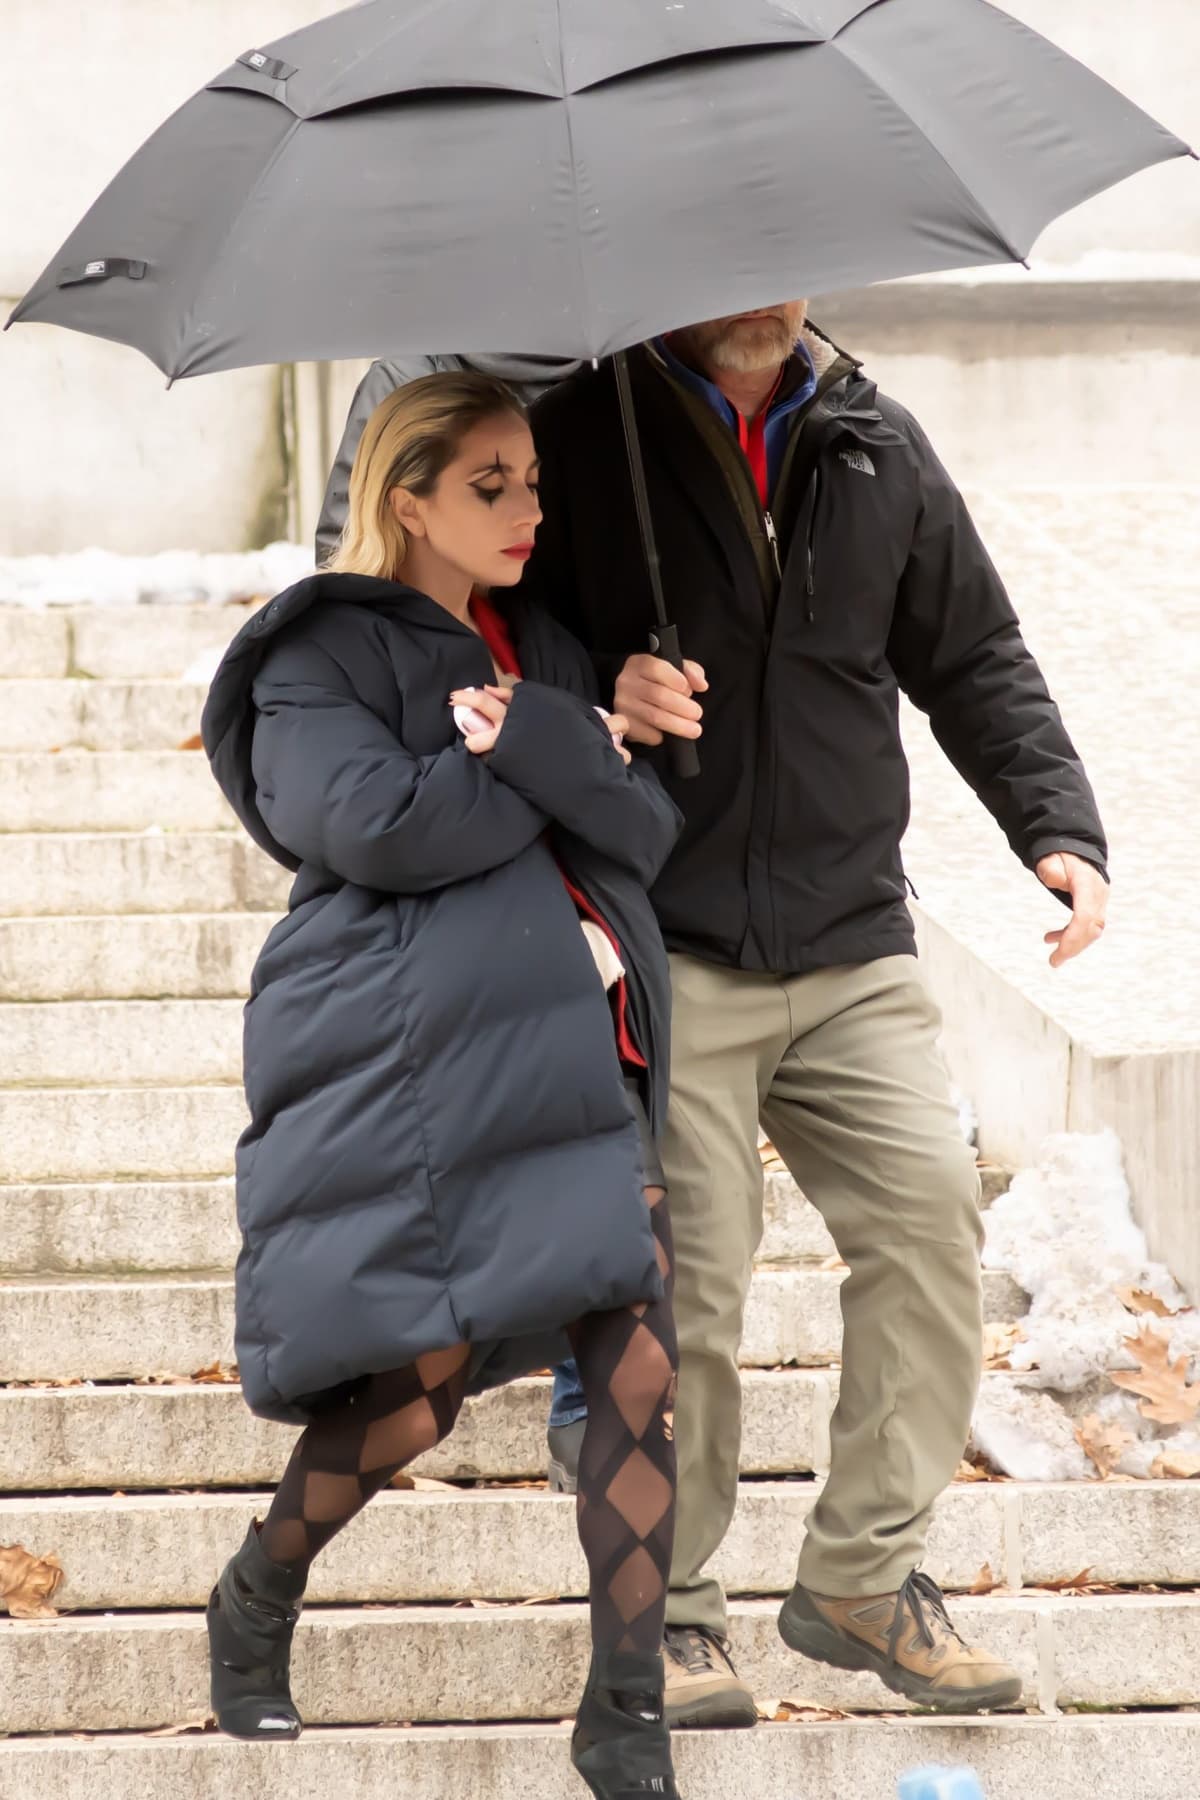 Lady Gaga kept herself warm with a dark blue jacket after filming wrapped for the day